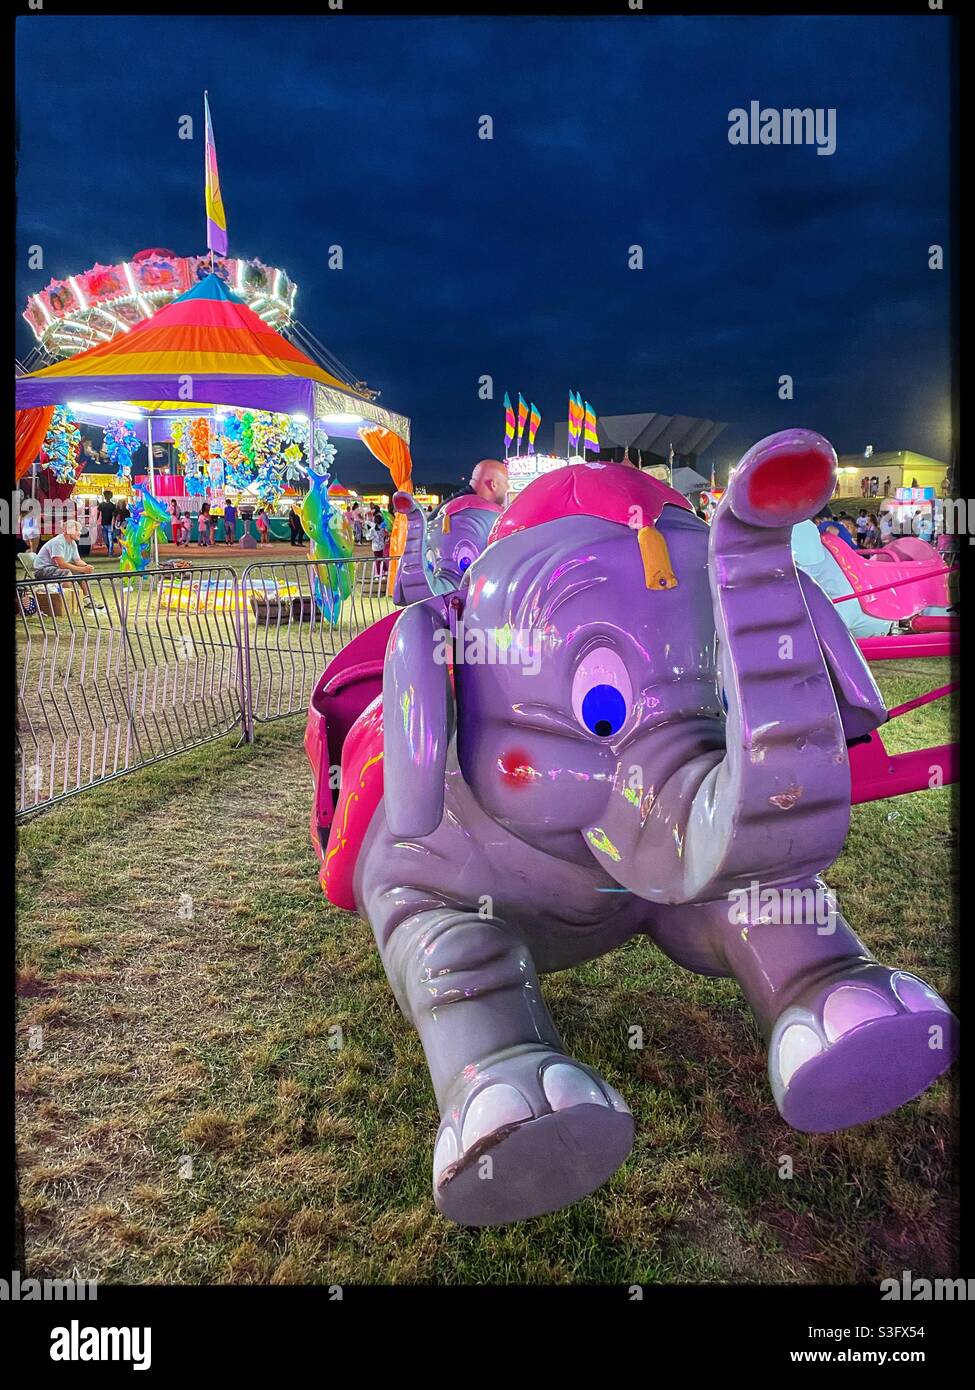 Kiddie ride at the fair Stock Photo